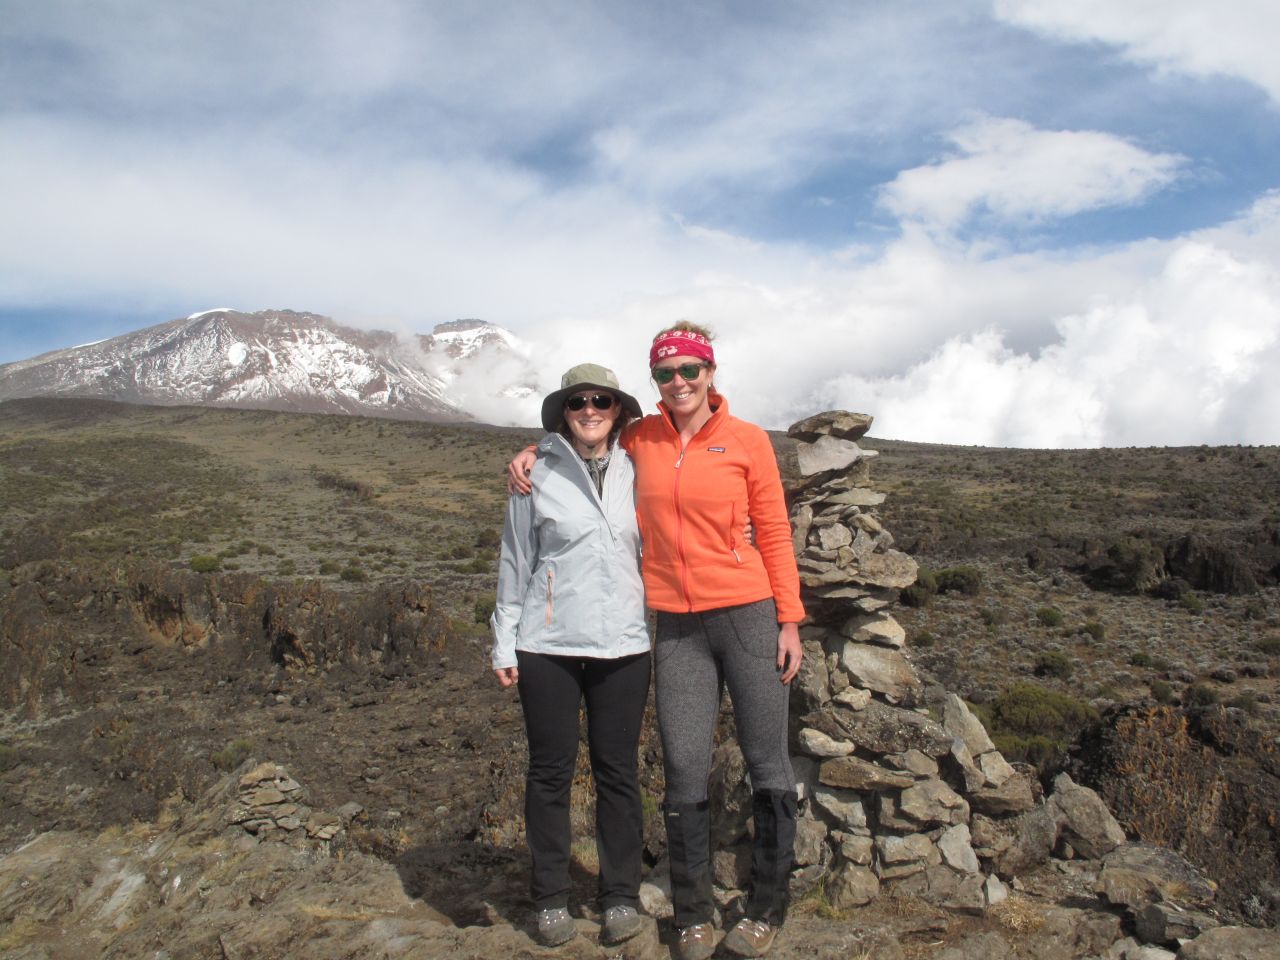 Brooke and her adventure travel partner-in-crime, Allison Ratajczak, pause along the way.